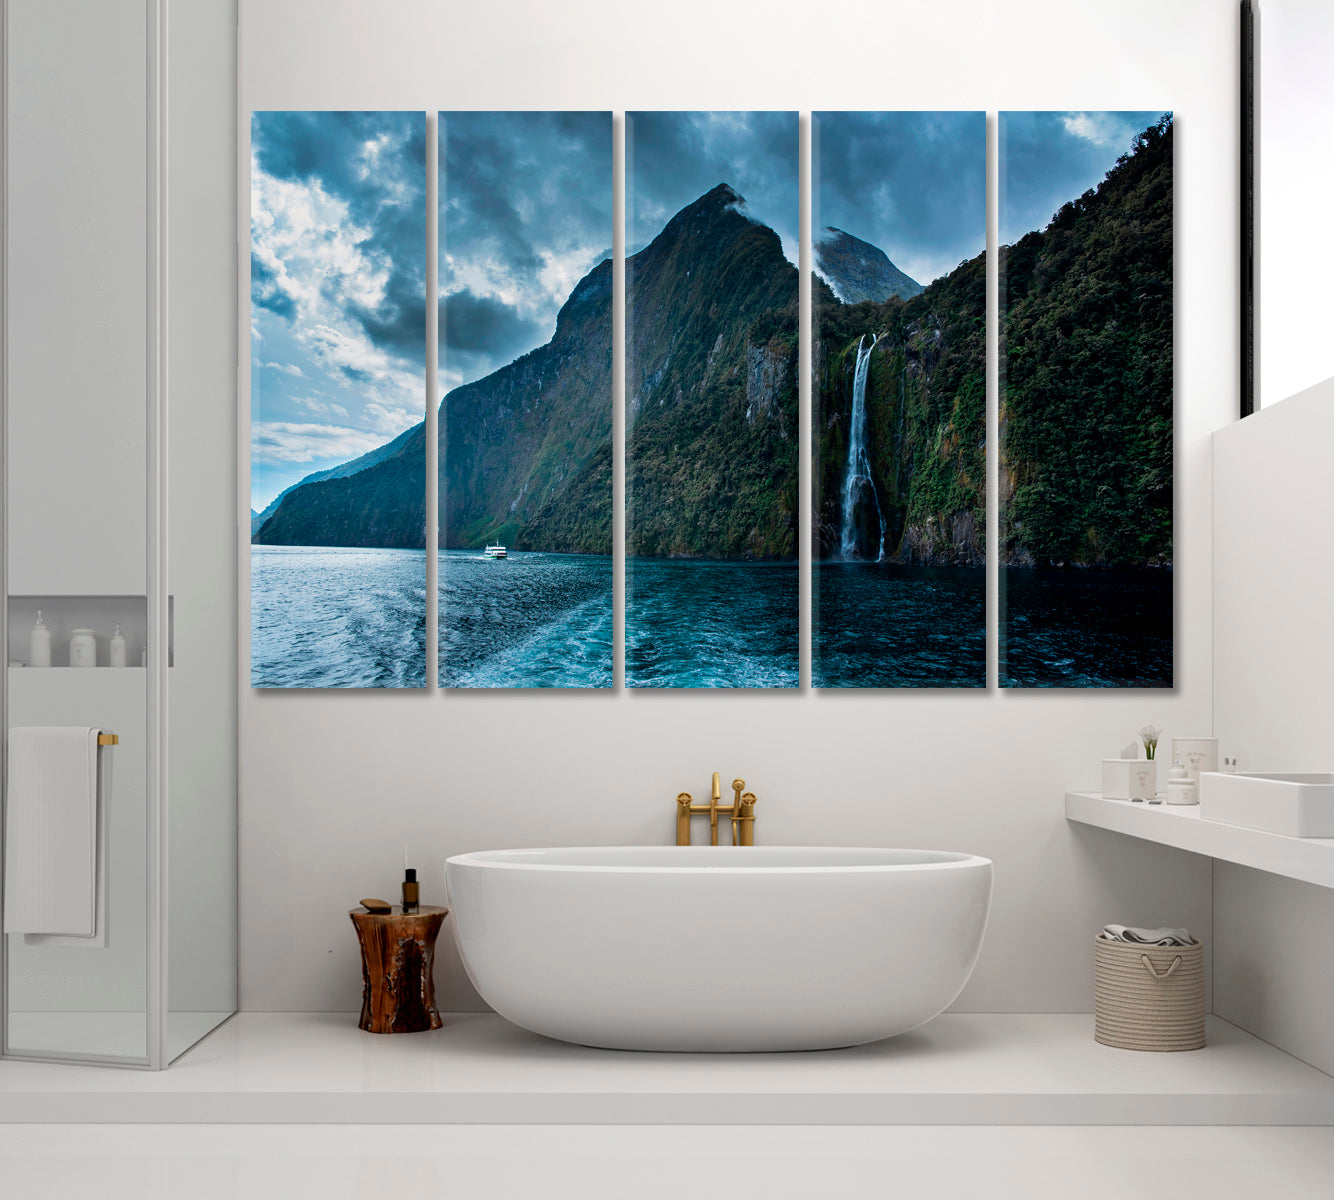 Milford Sound Waterfalls Canvas Print ArtLexy 5 Panels 36"x24" inches 